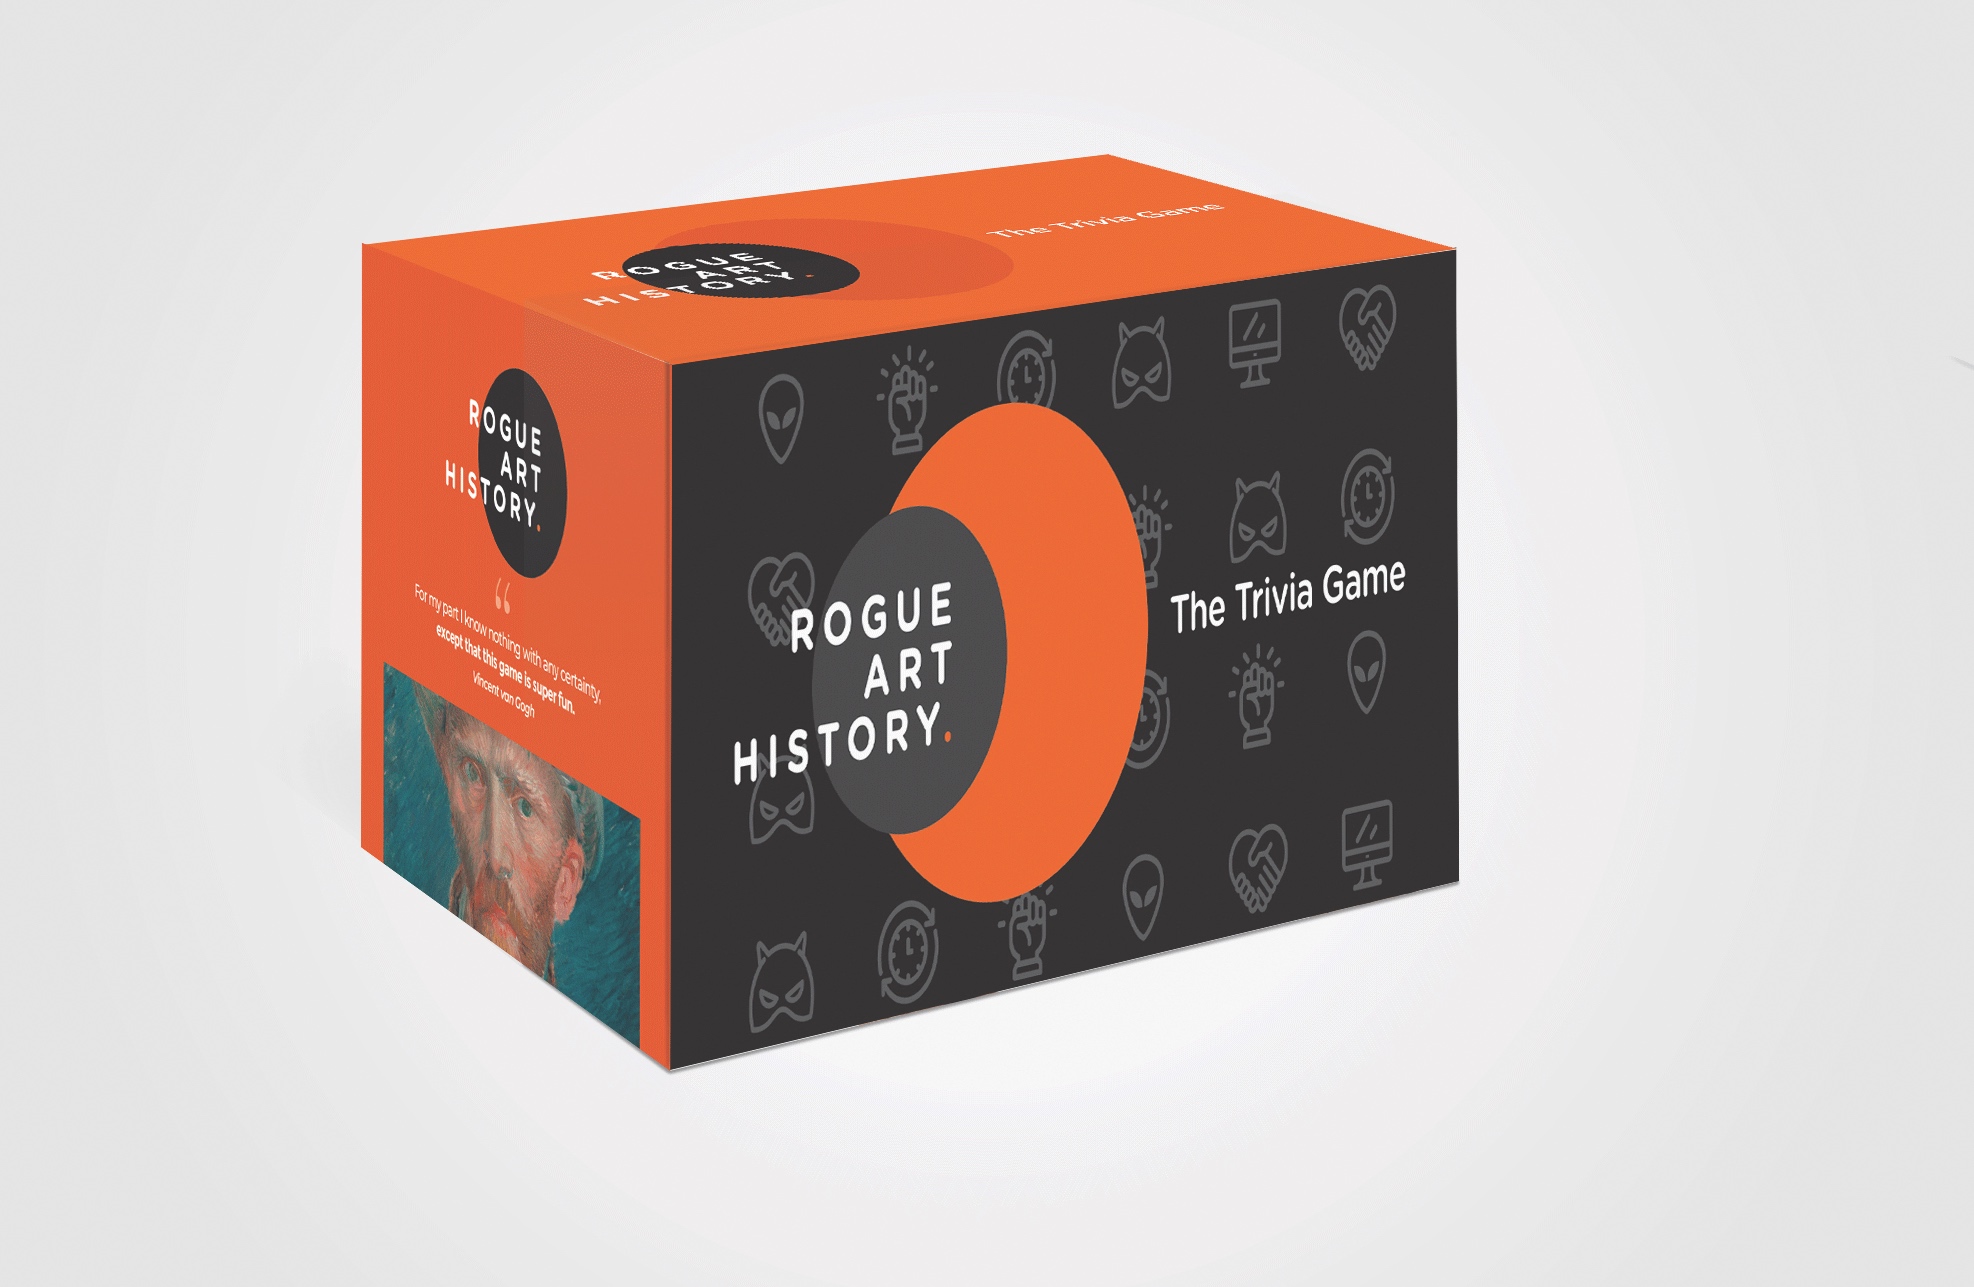 Rogue Art History The Trivia Game 
															/ SCHIFFER Publishing							